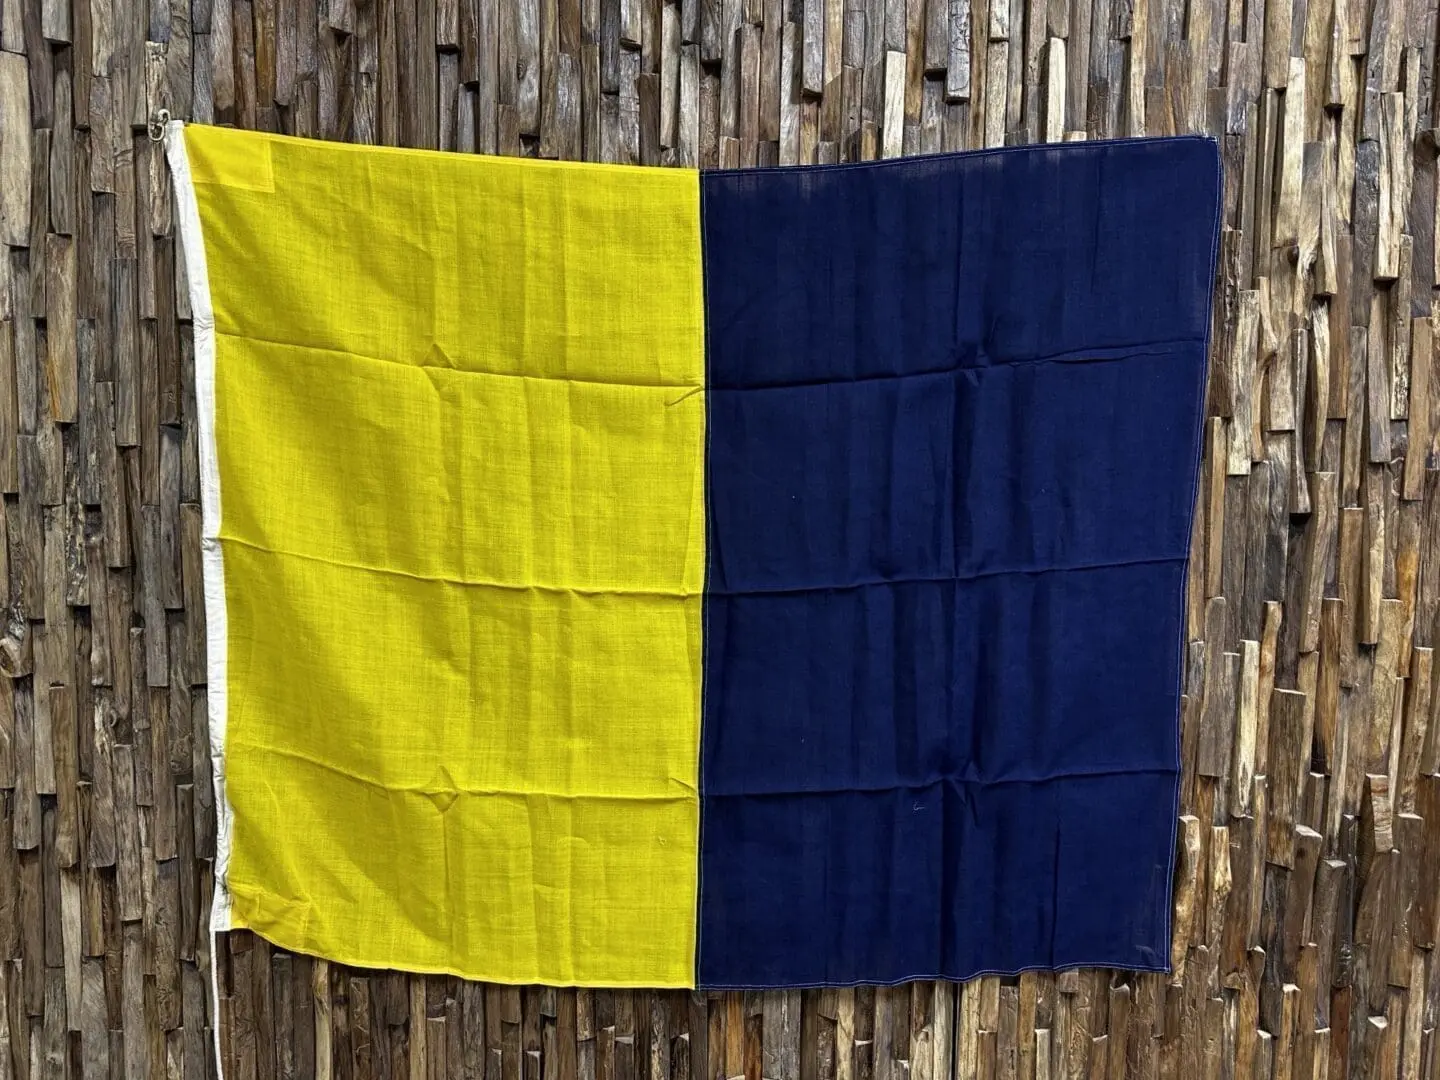 A yellow and blue flag hanging on the wall.